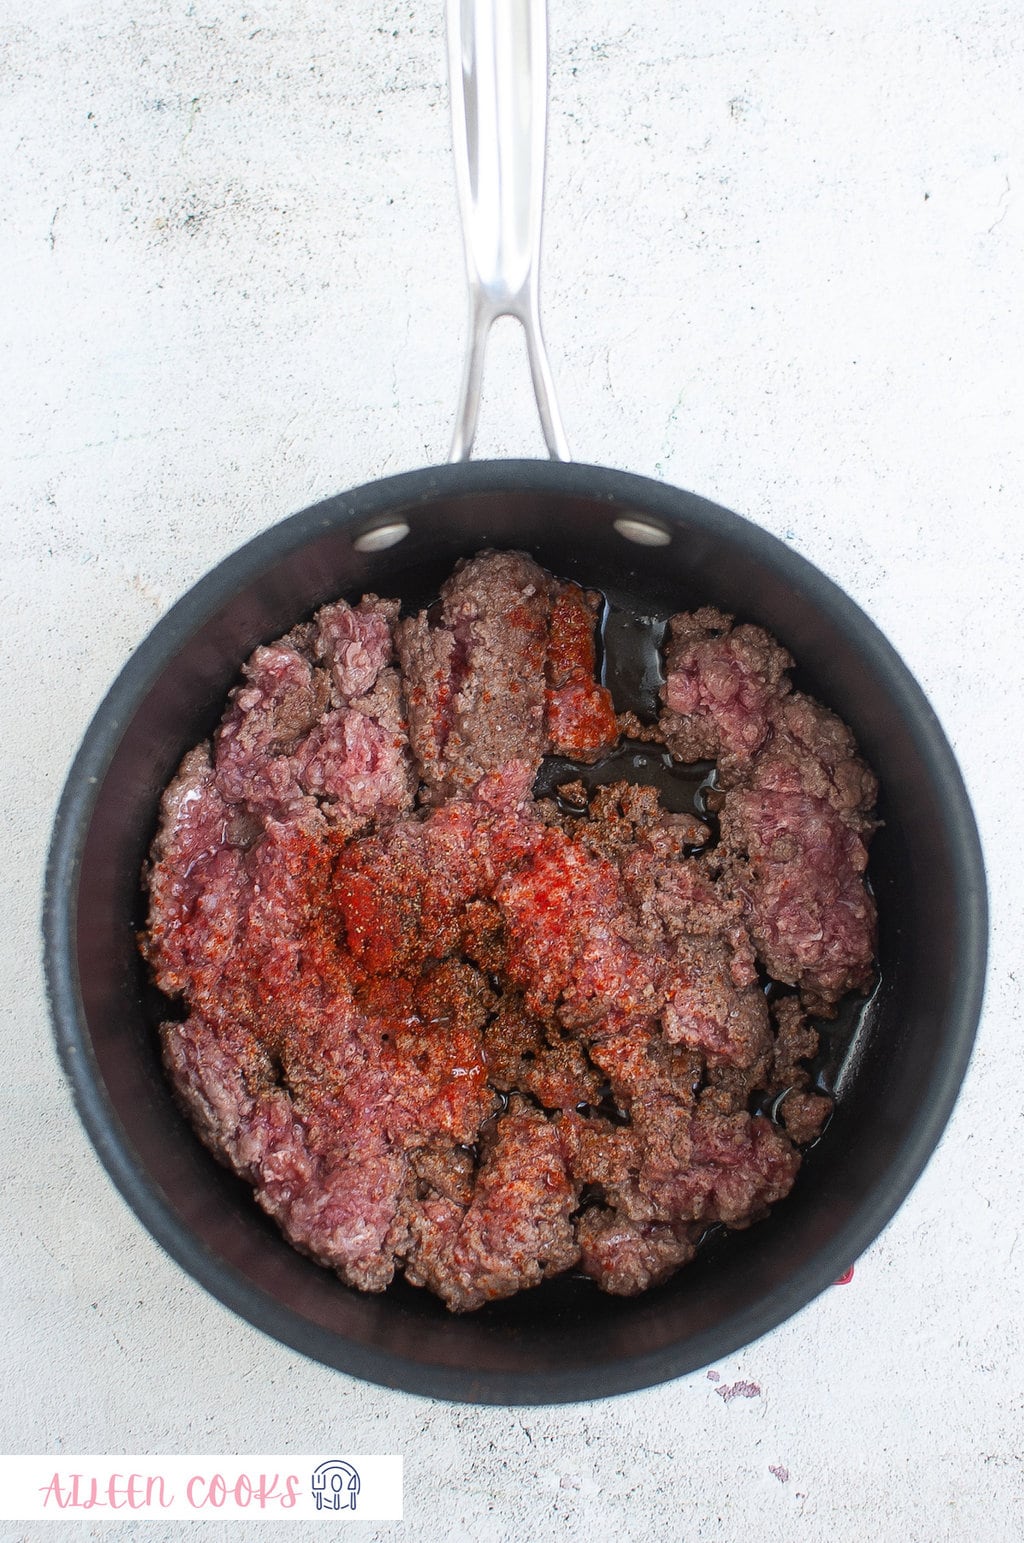 Browning ground beef in a non-stick skillet